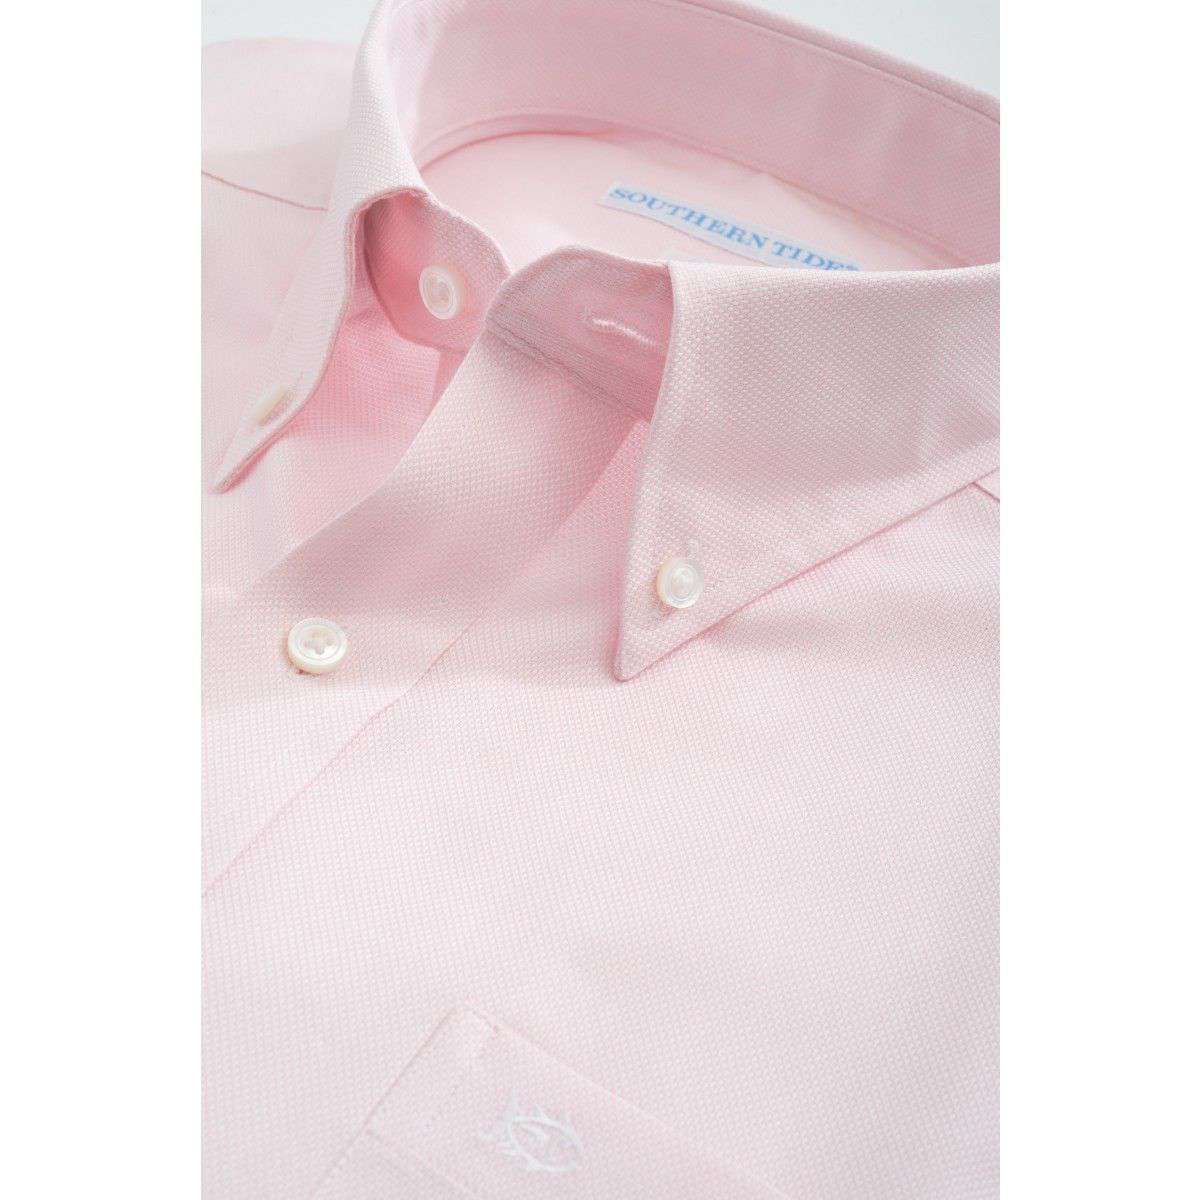 Classic Fit Royal Oxford in Pink by Southern Tide - Country Club Prep